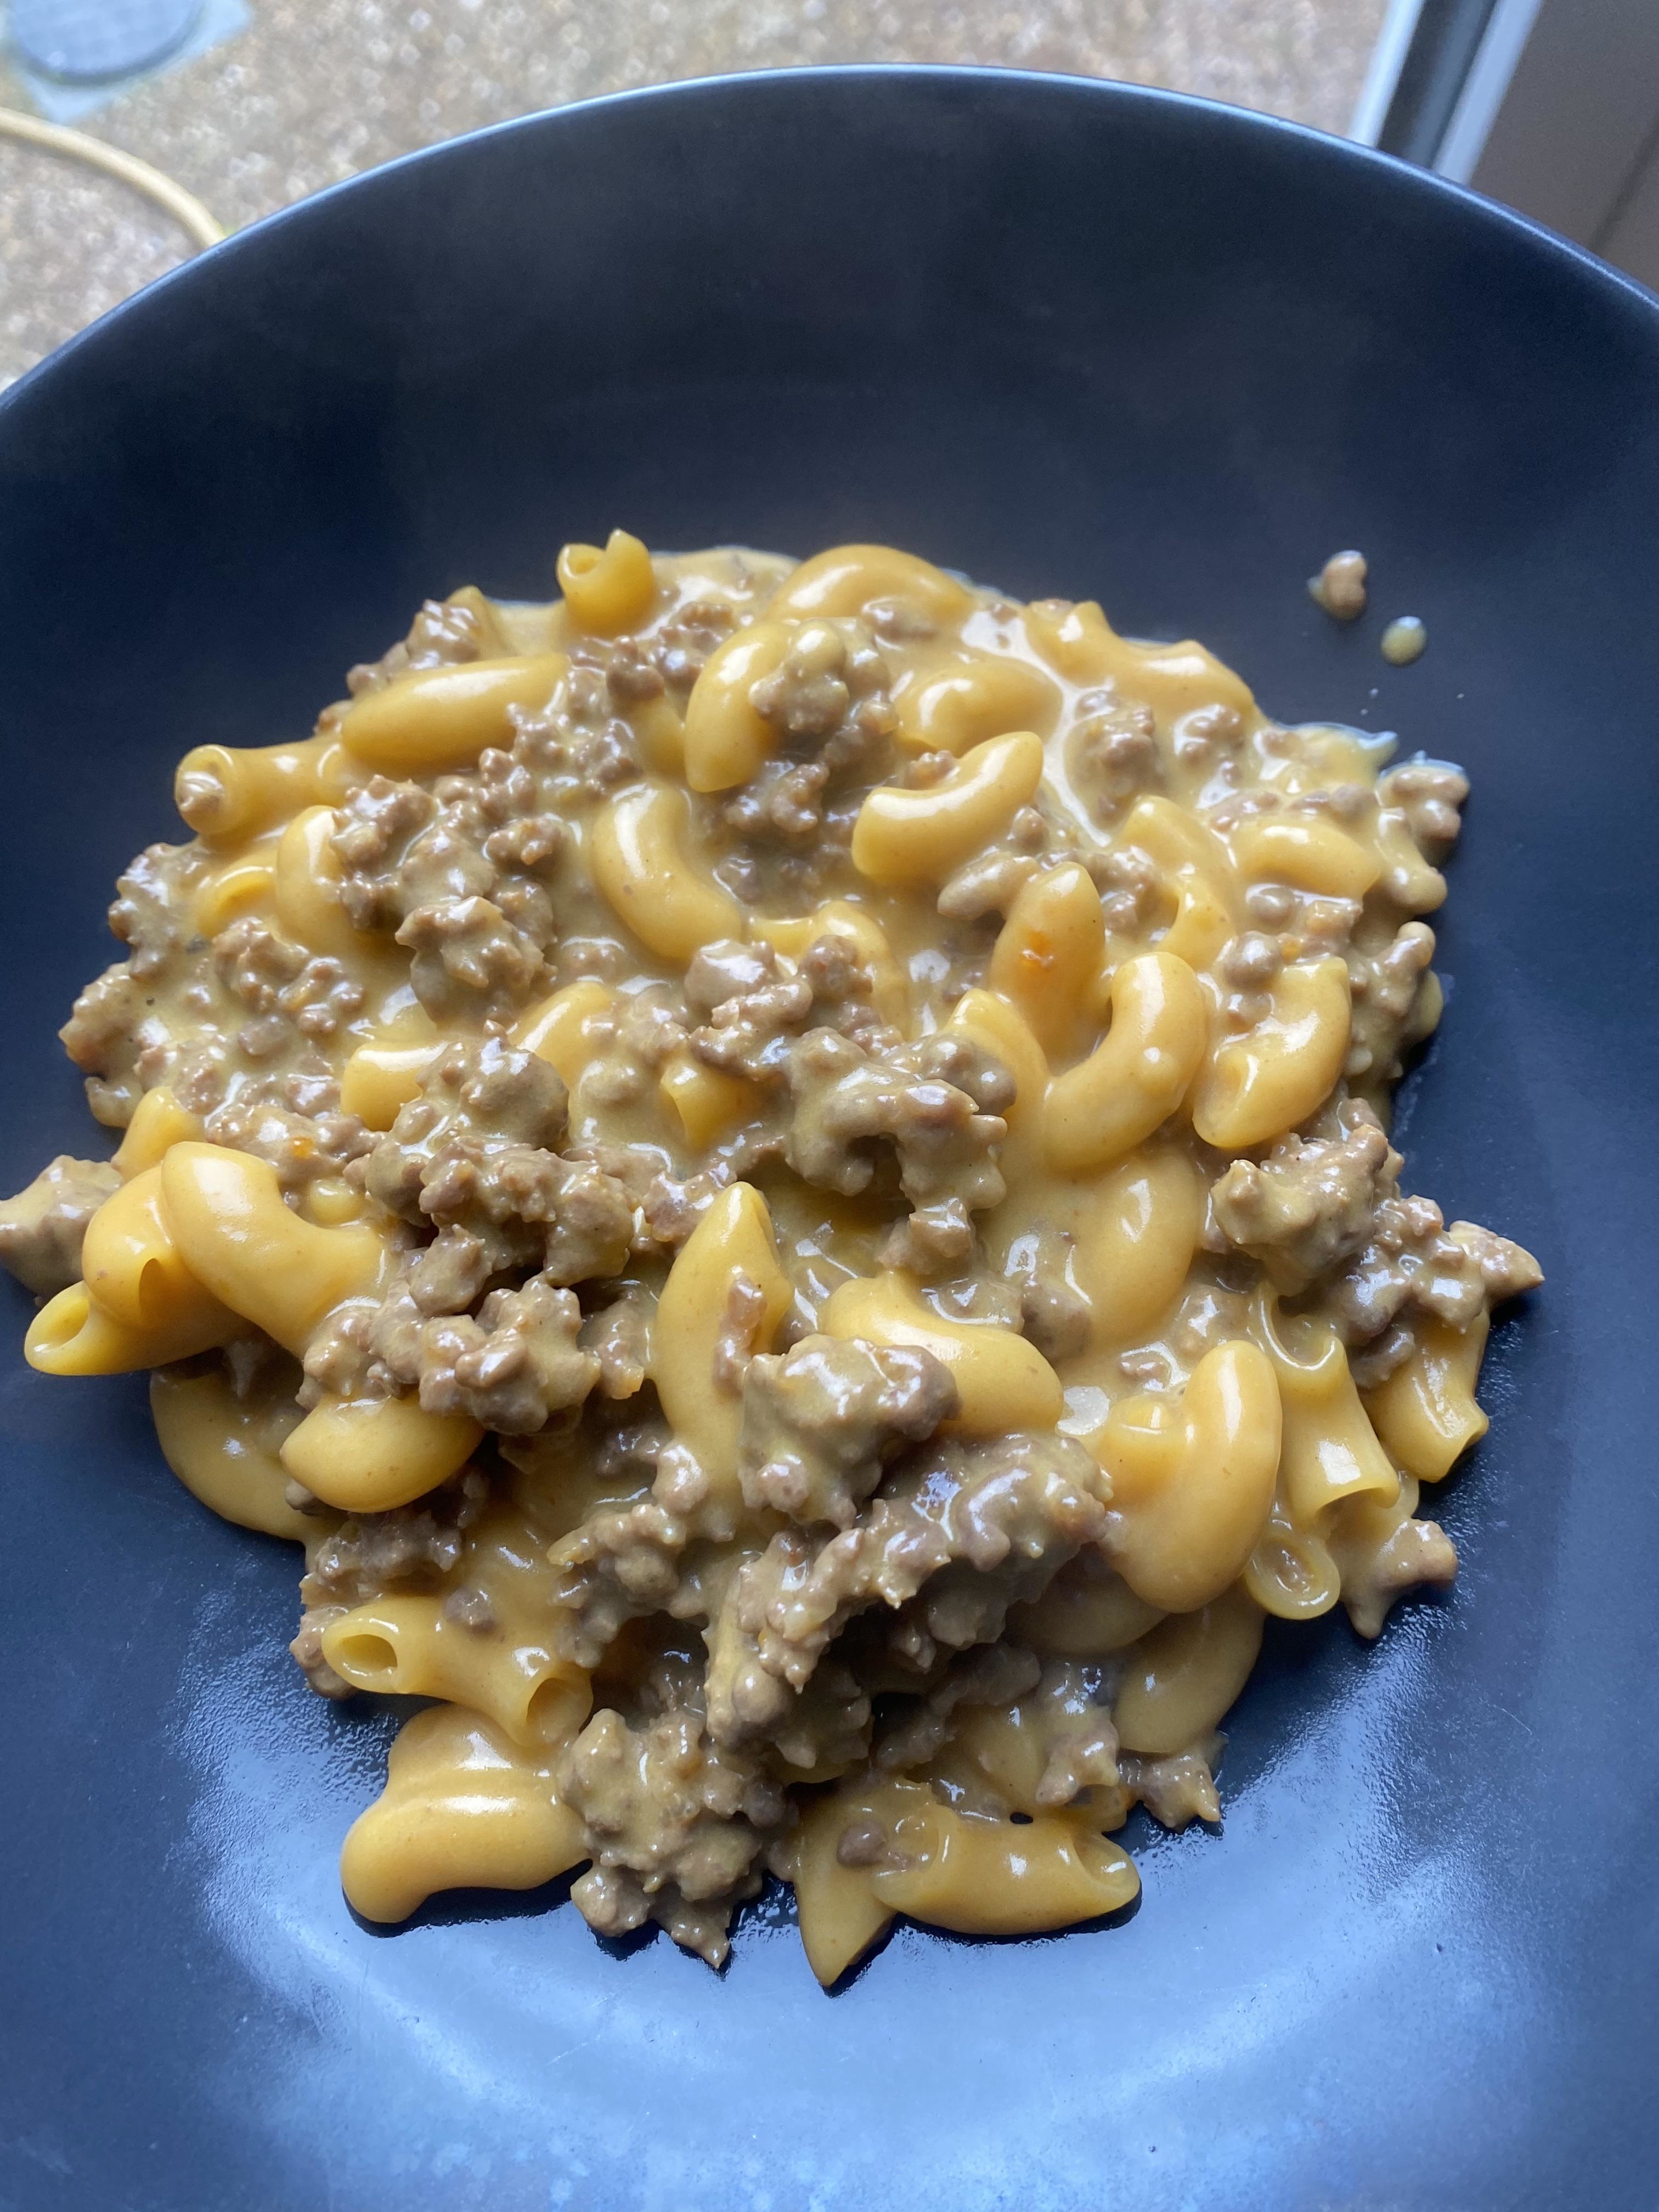 A bowl of macaroni with creamy cheese sauce and ground beef topping